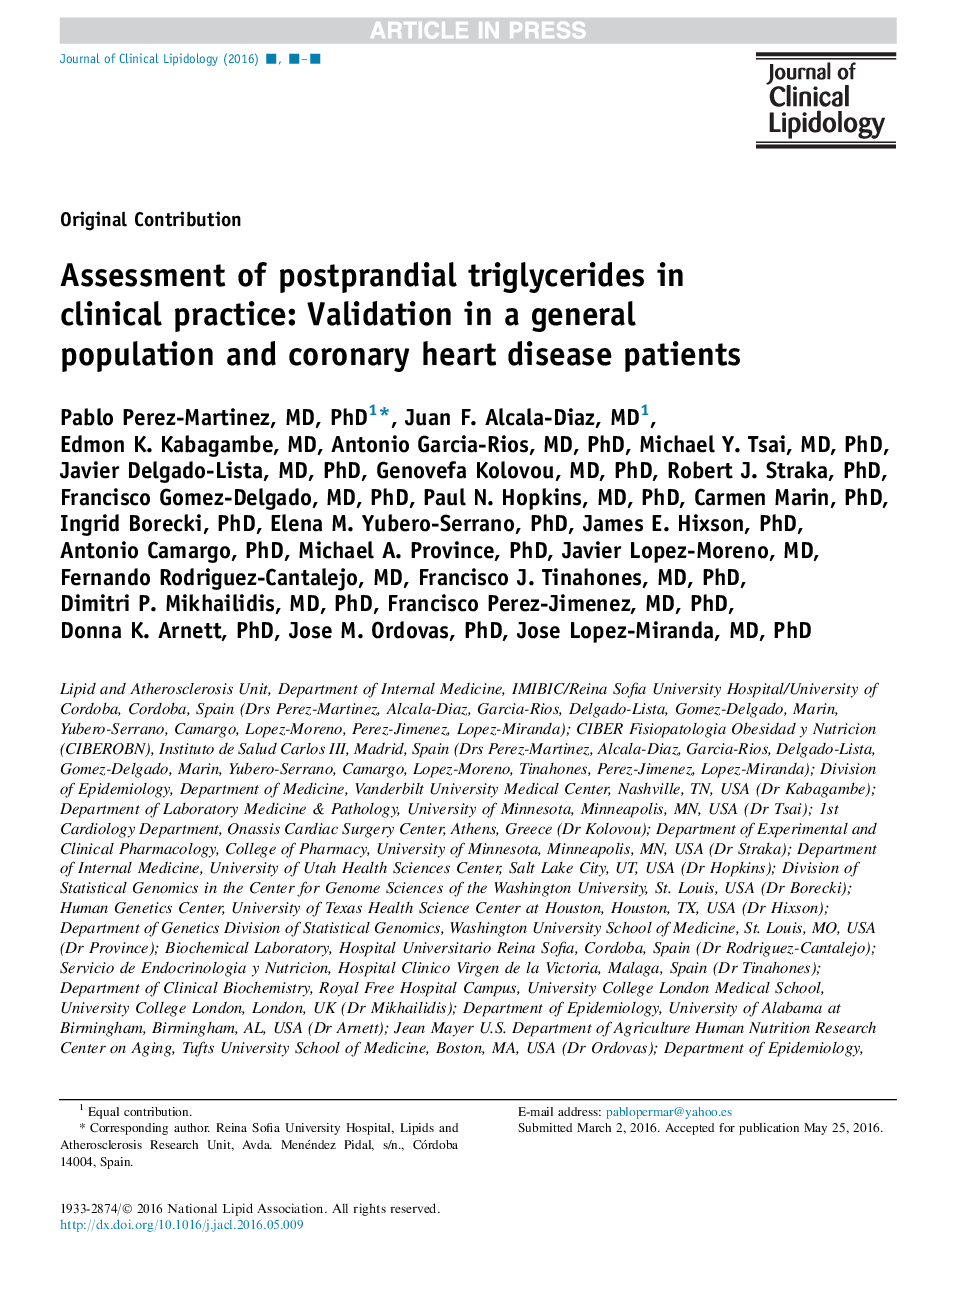 Assessment of postprandial triglycerides in clinical practice: Validation in a general population and coronary heart disease patients